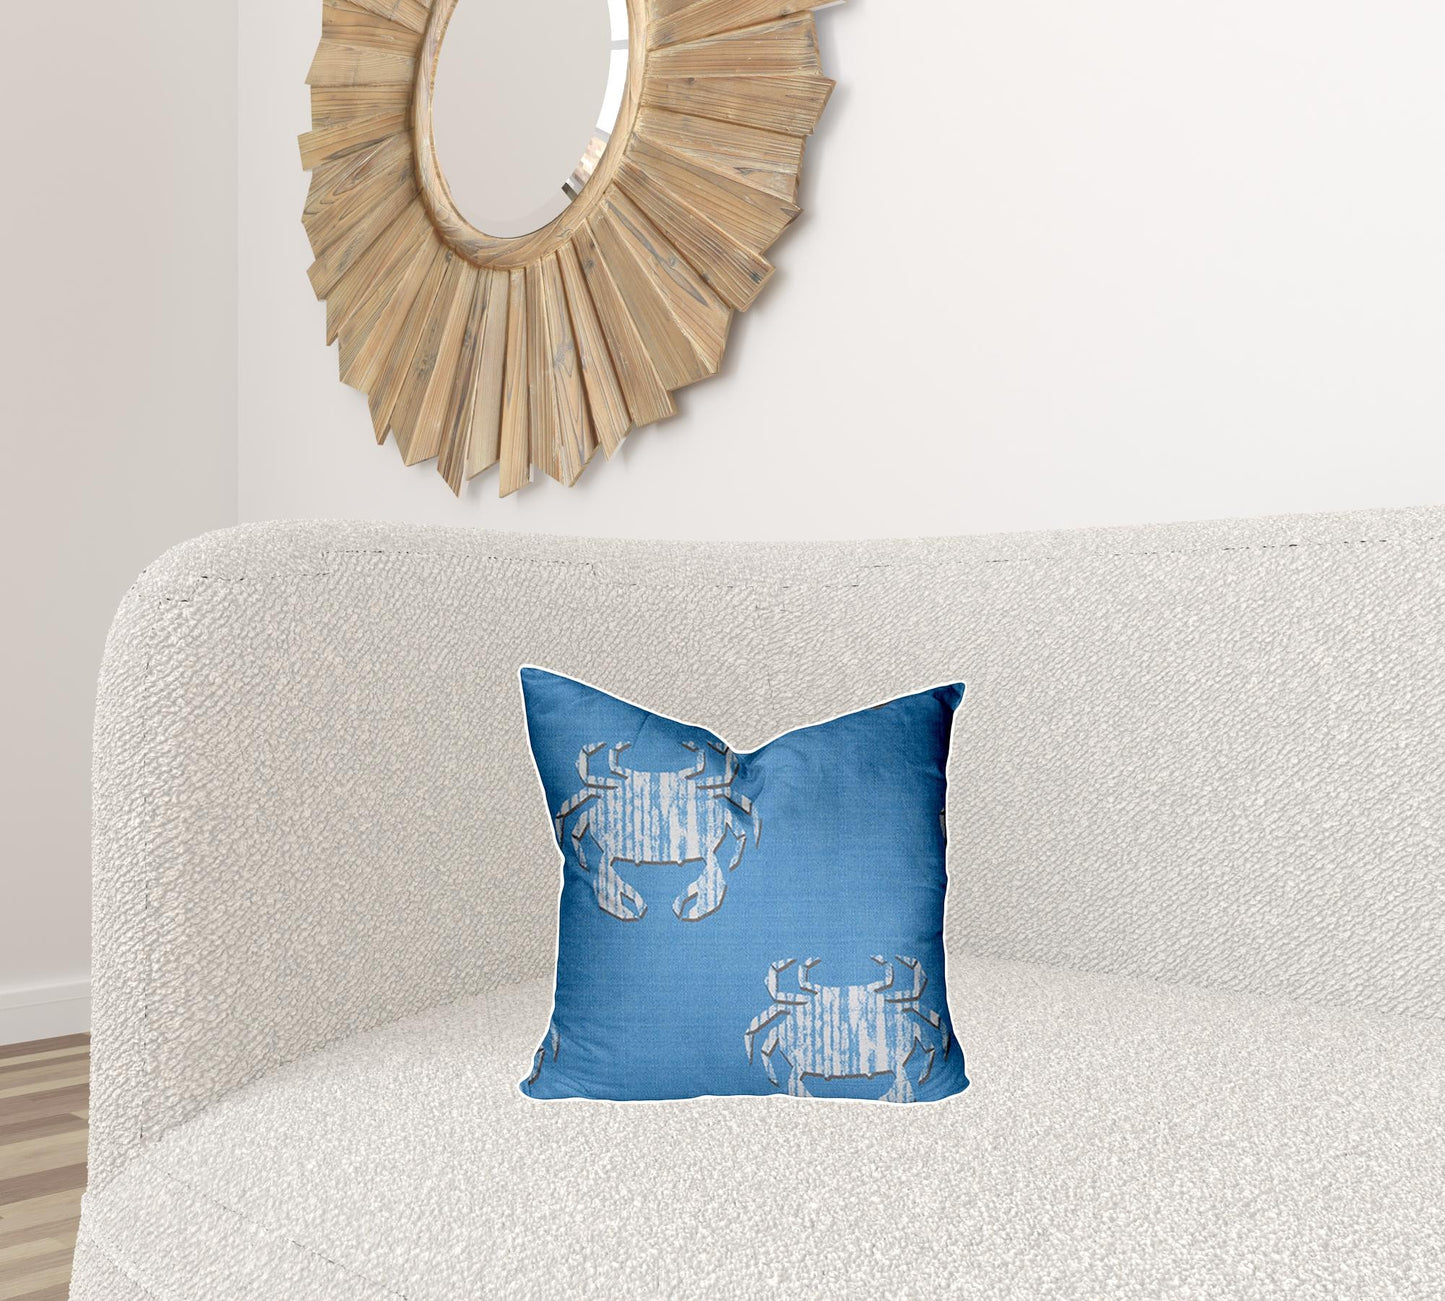 16" X 16" Blue And White Crab Enveloped Coastal Throw Indoor Outdoor Pillow